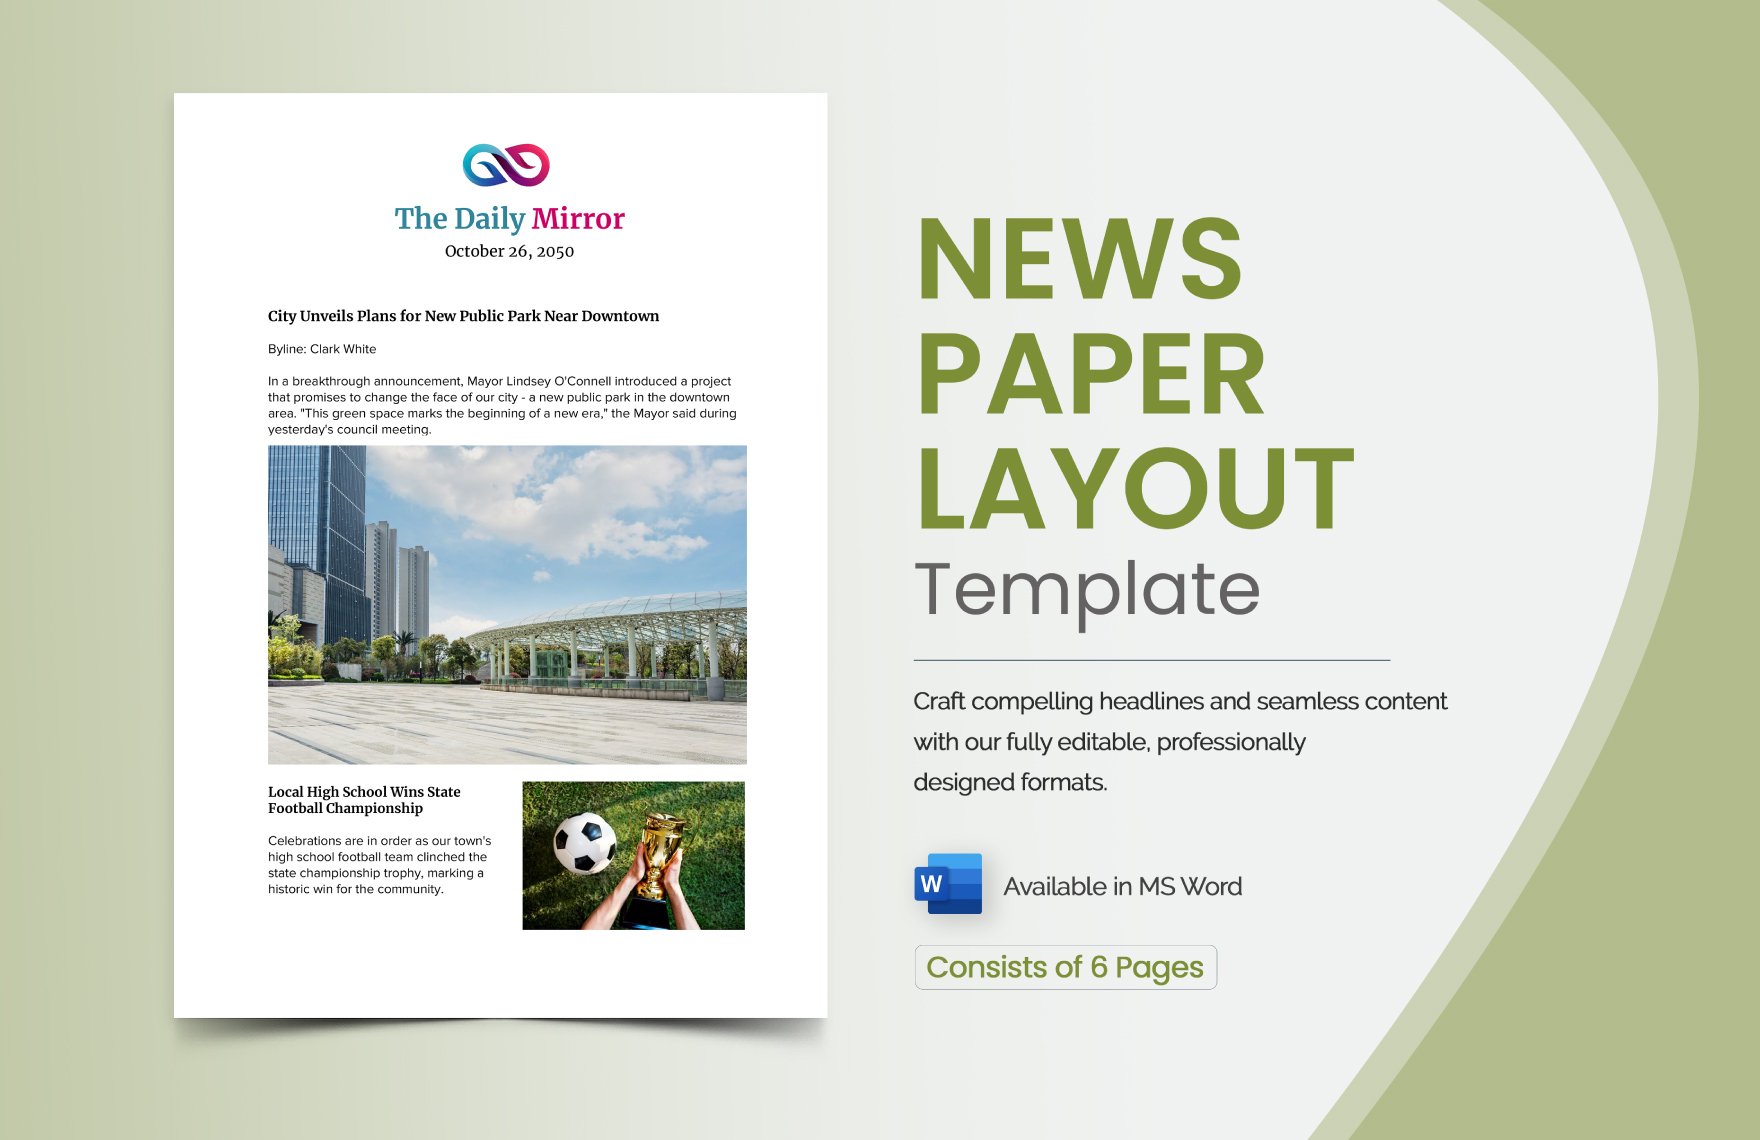 News Paper Layout Template